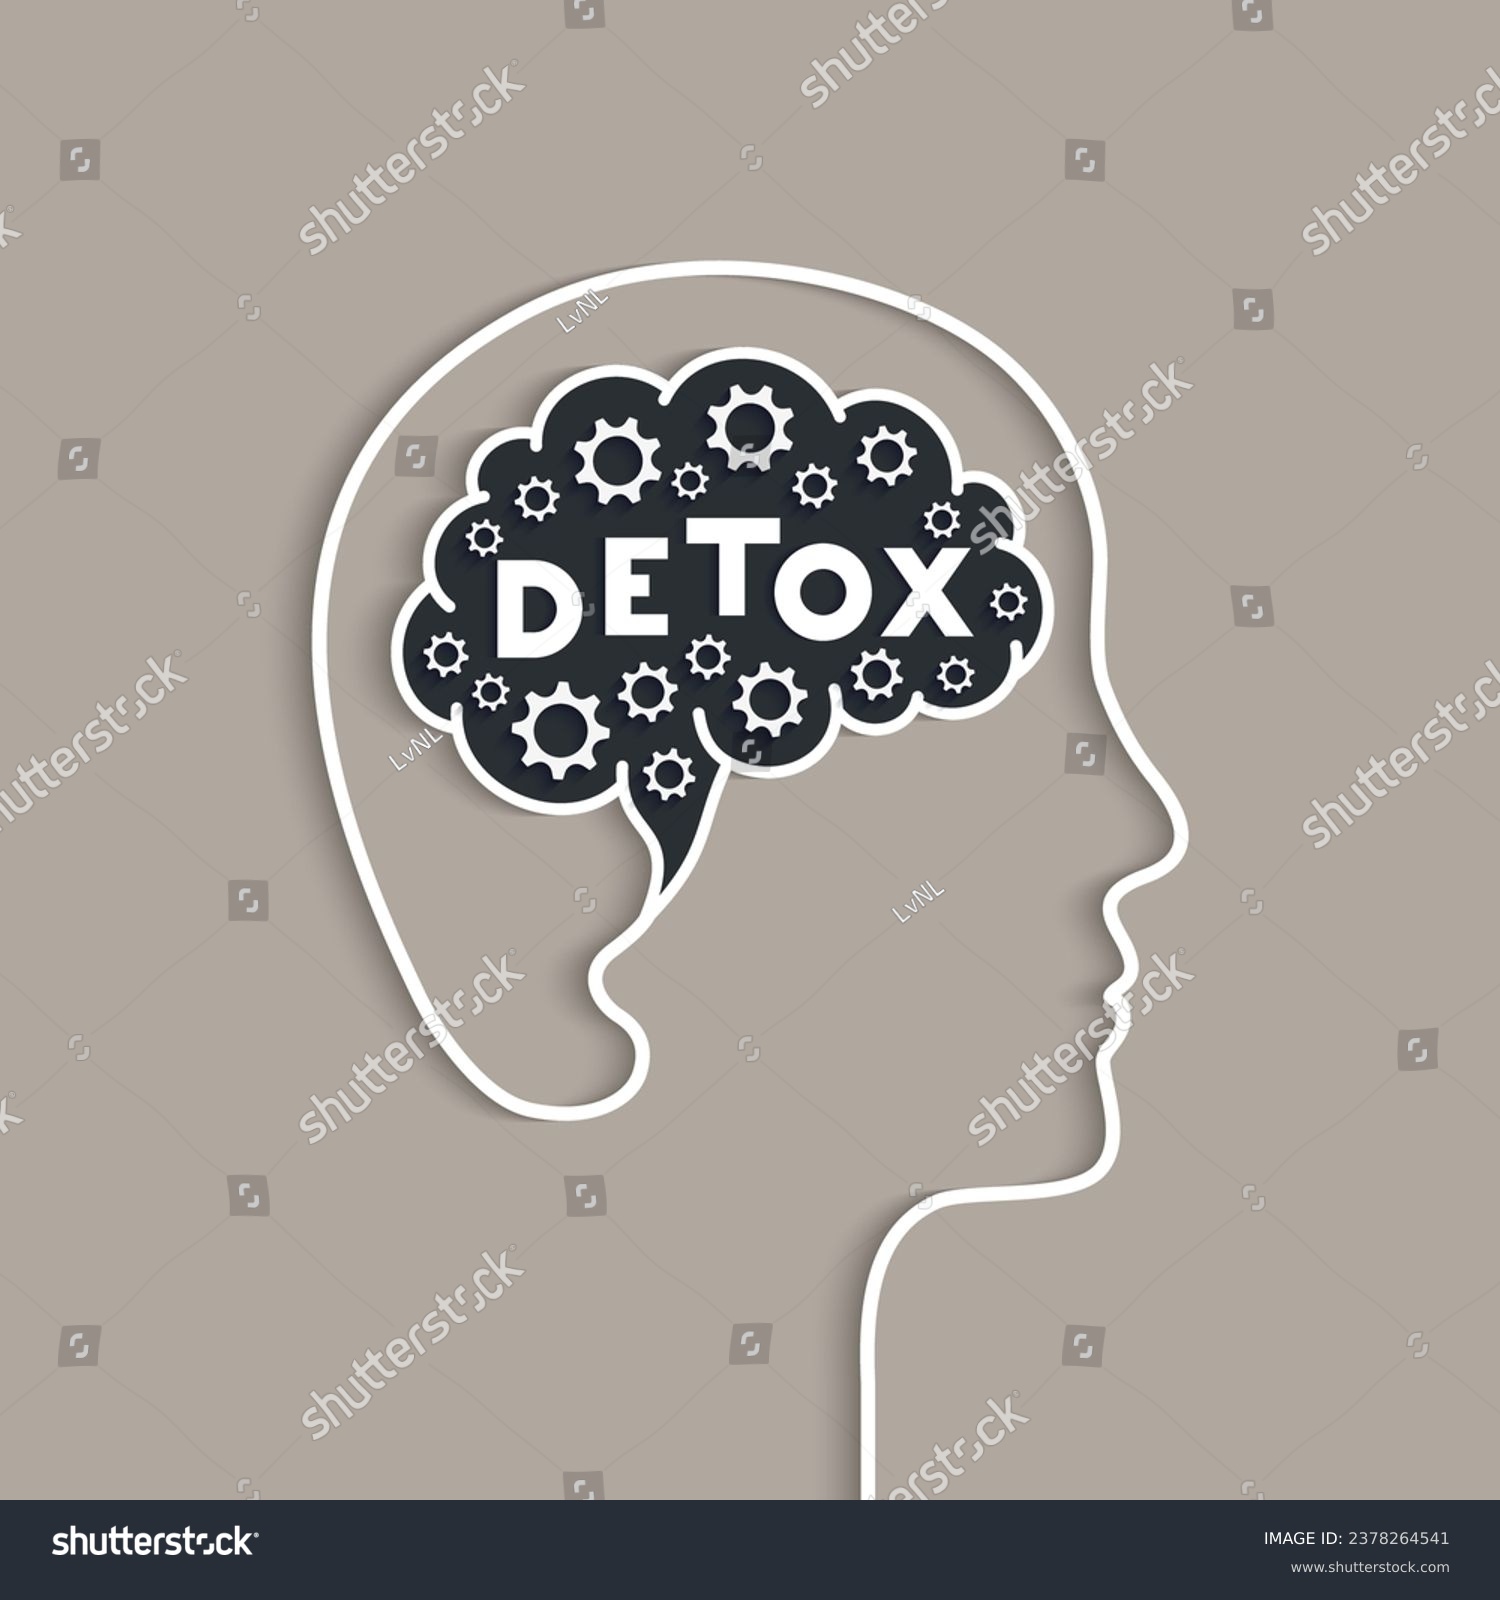 SVG of Detox concept with head, mind, gears and letters. Brain detox, mental detoxification. Profile outline, face silhouette of a person. Vector illustration in paper cut art with shadow. svg